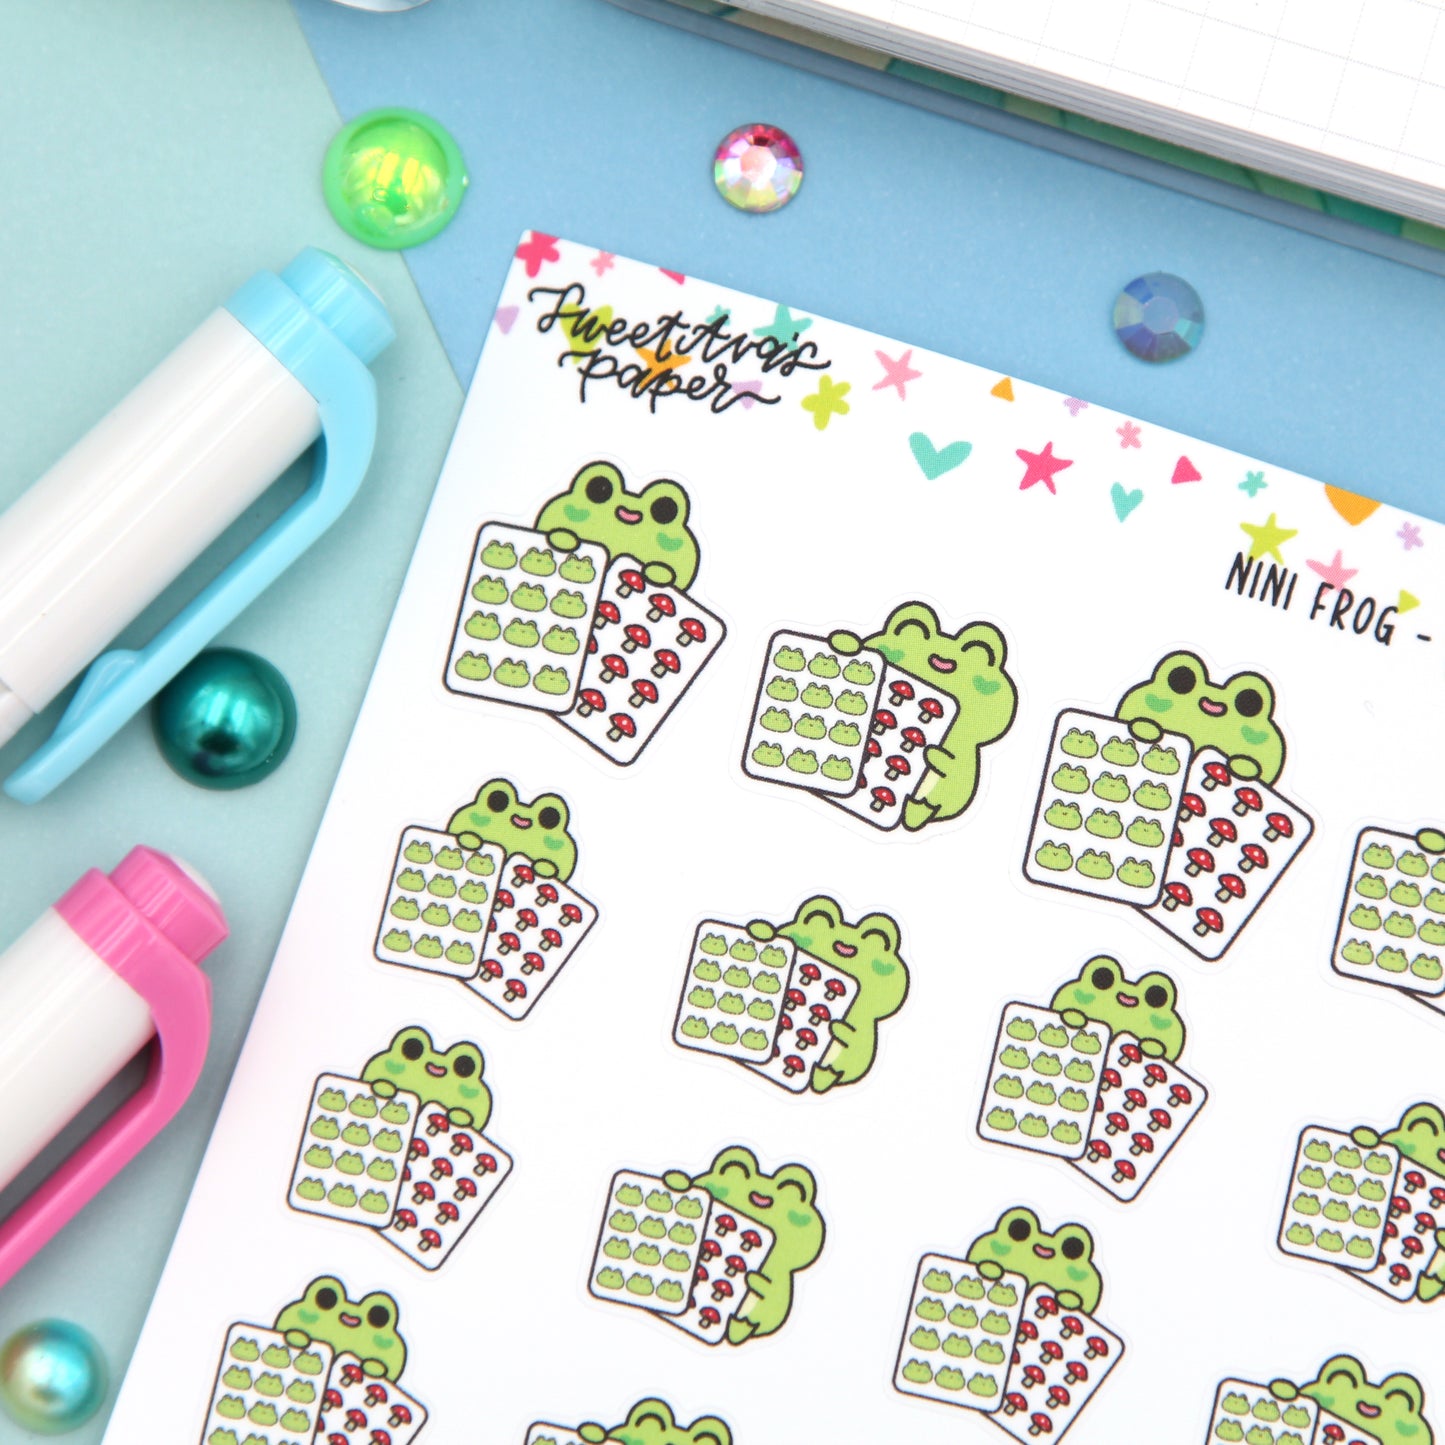 Play With Stickers - Planner Stickers - Sticker Book Planner Stickers - Character Planner Stickers - Nini Frog - [1445]